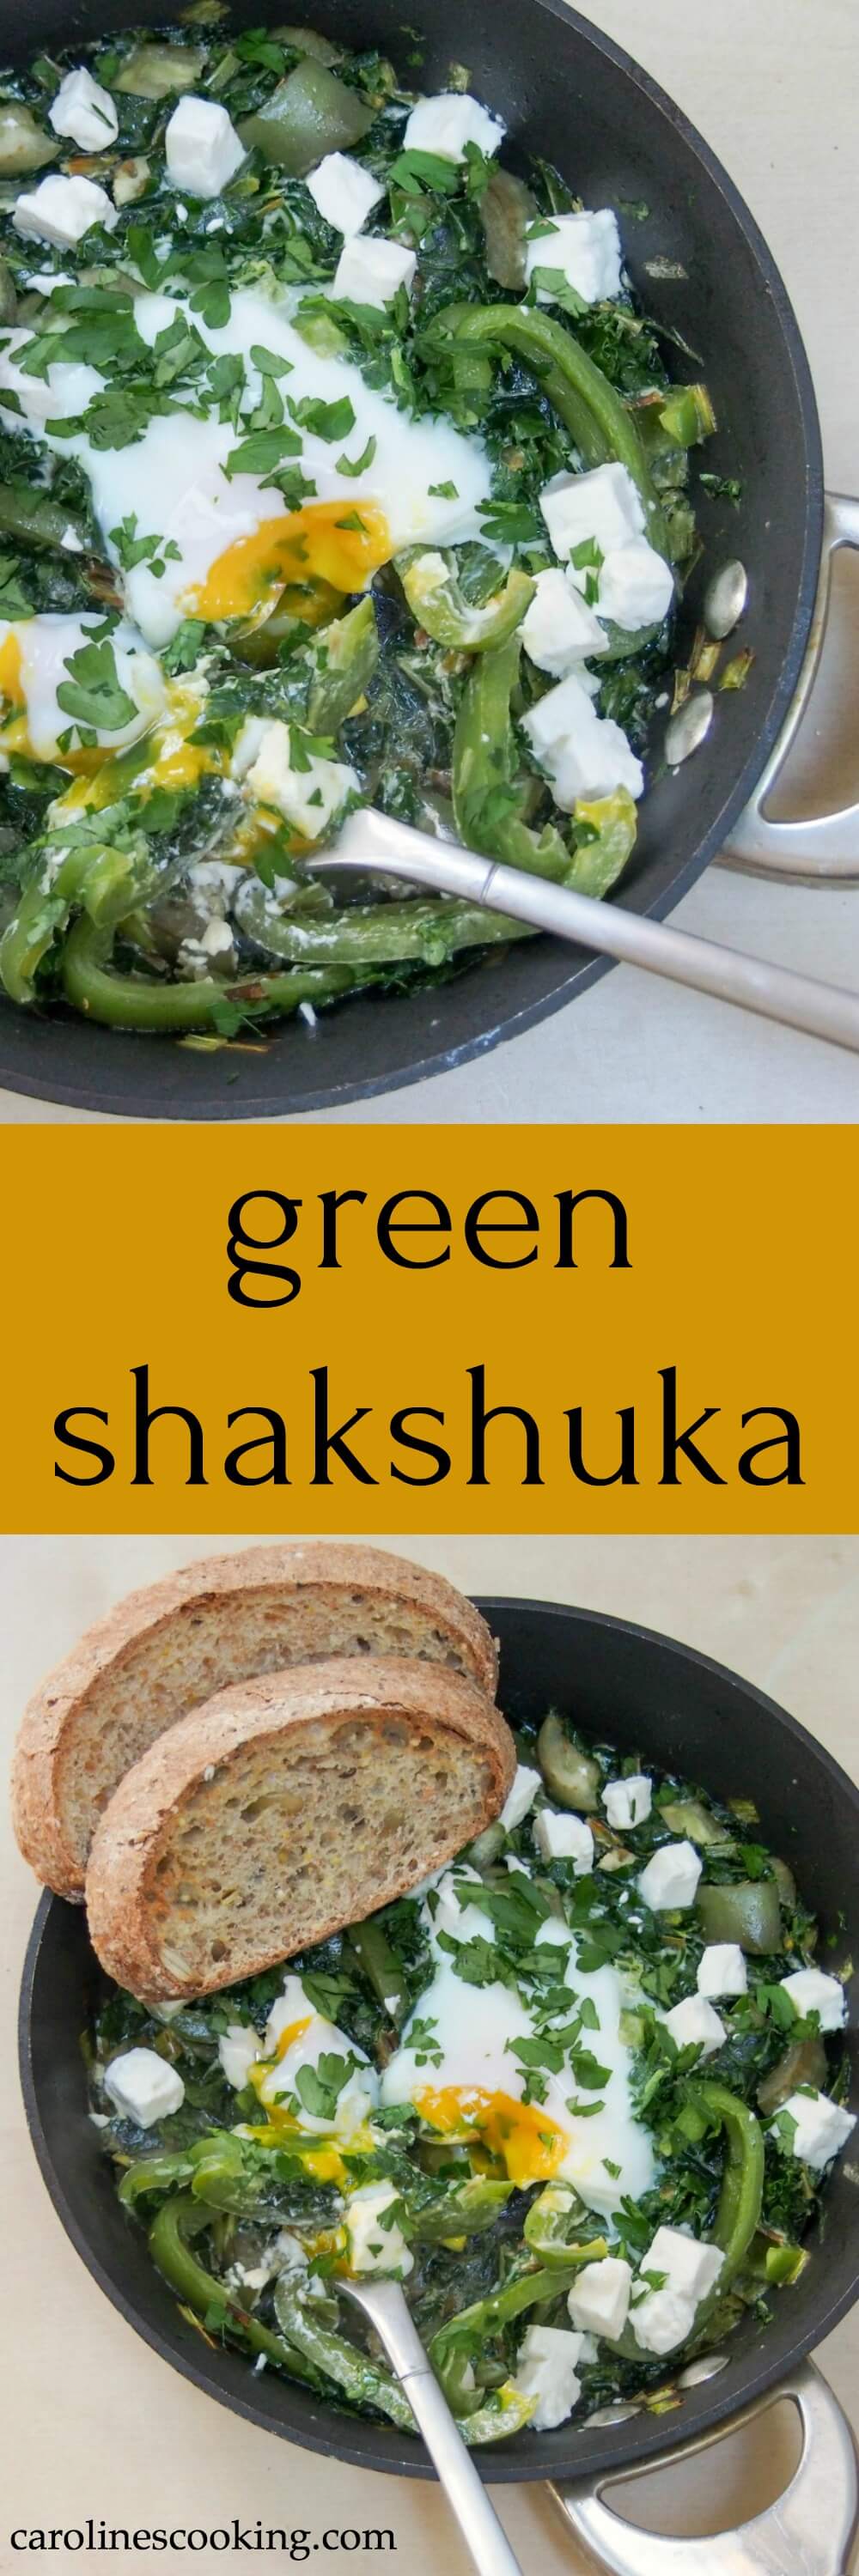 A twist on the traditional, this shakshuka is all green and all delicious.  Quick to make, it's good for you too.  A great brunch or anytime meal.